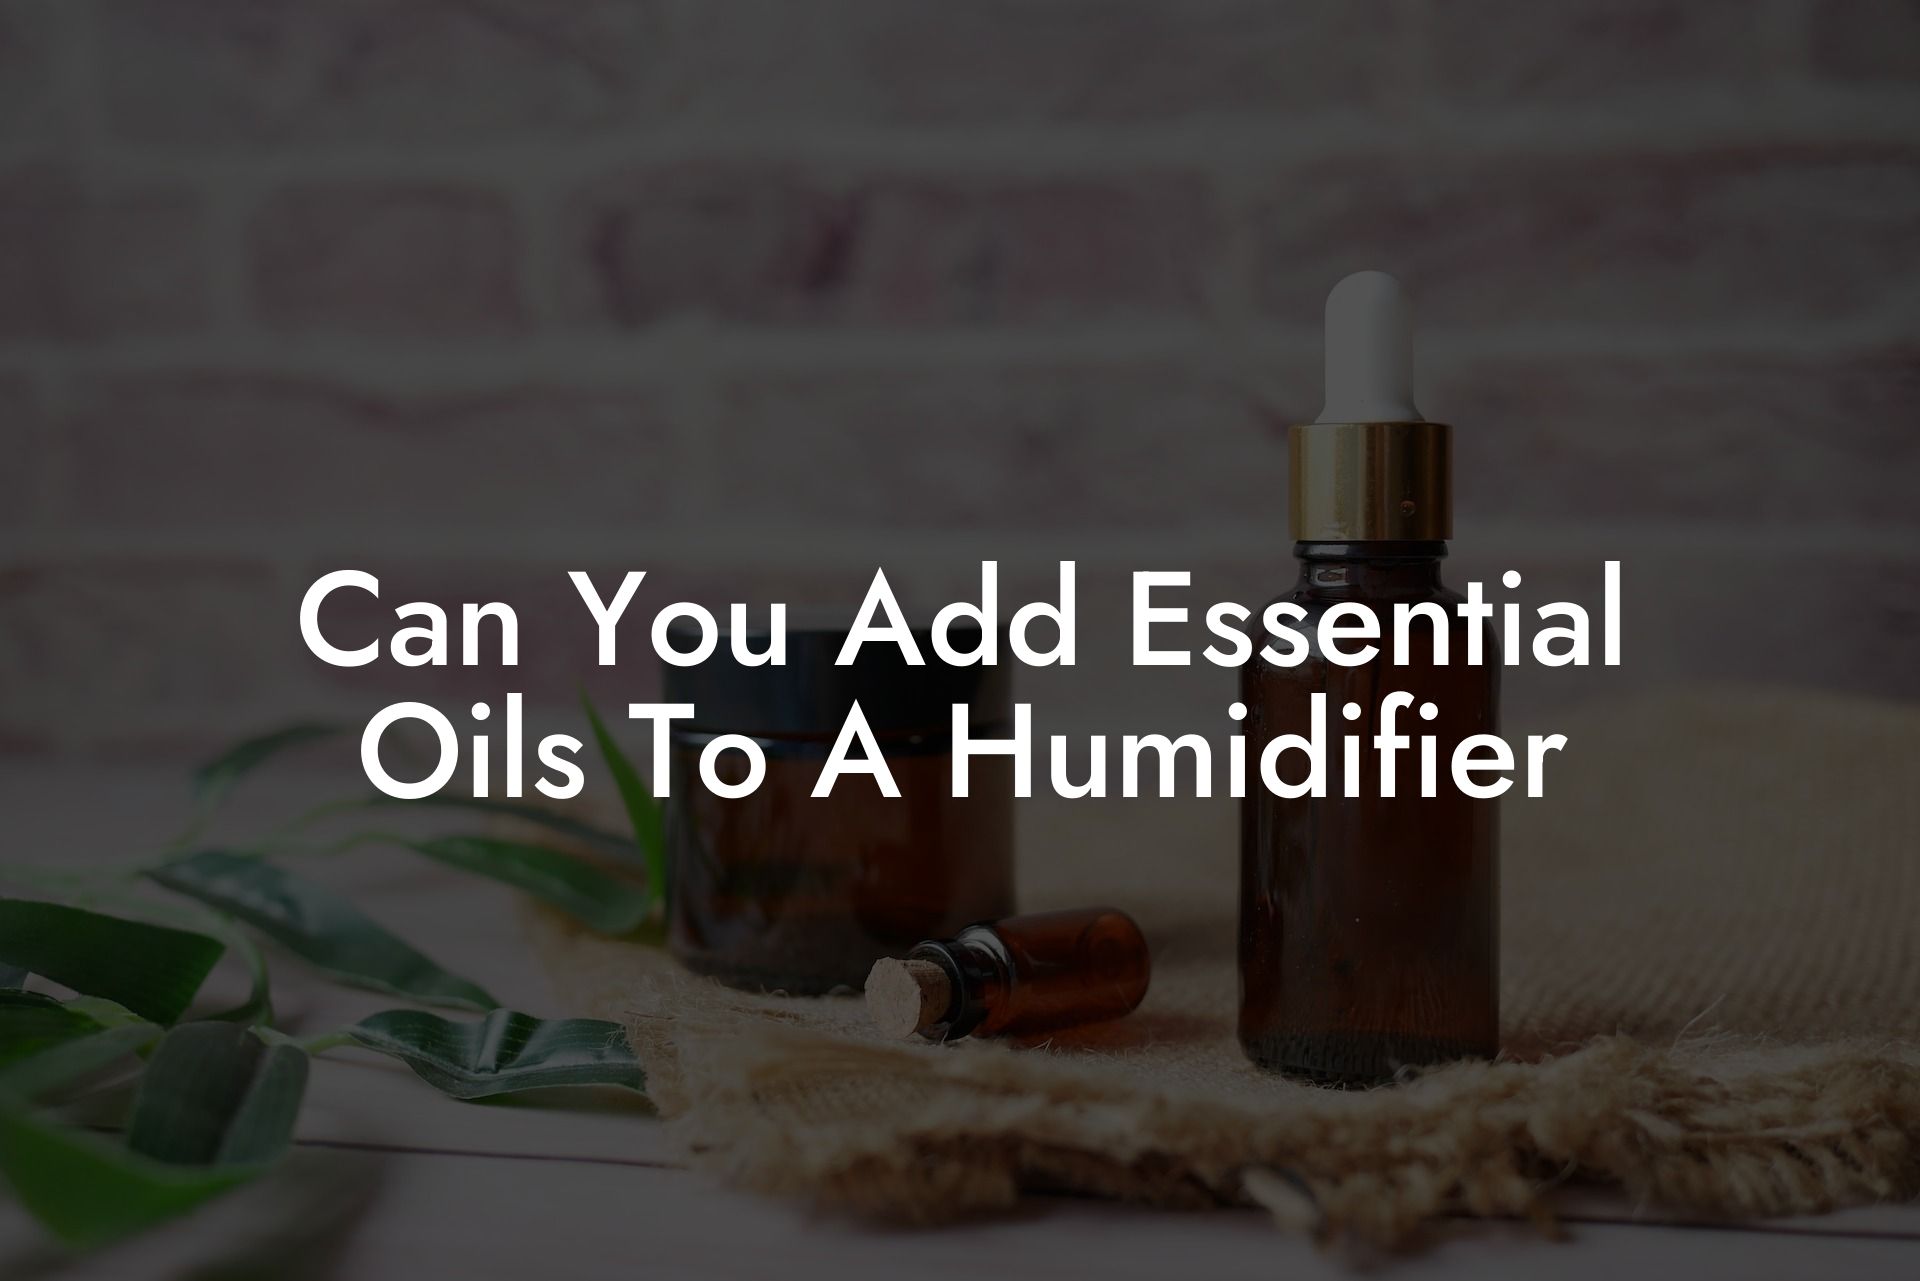 Can You Add Essential Oils To A Humidifier